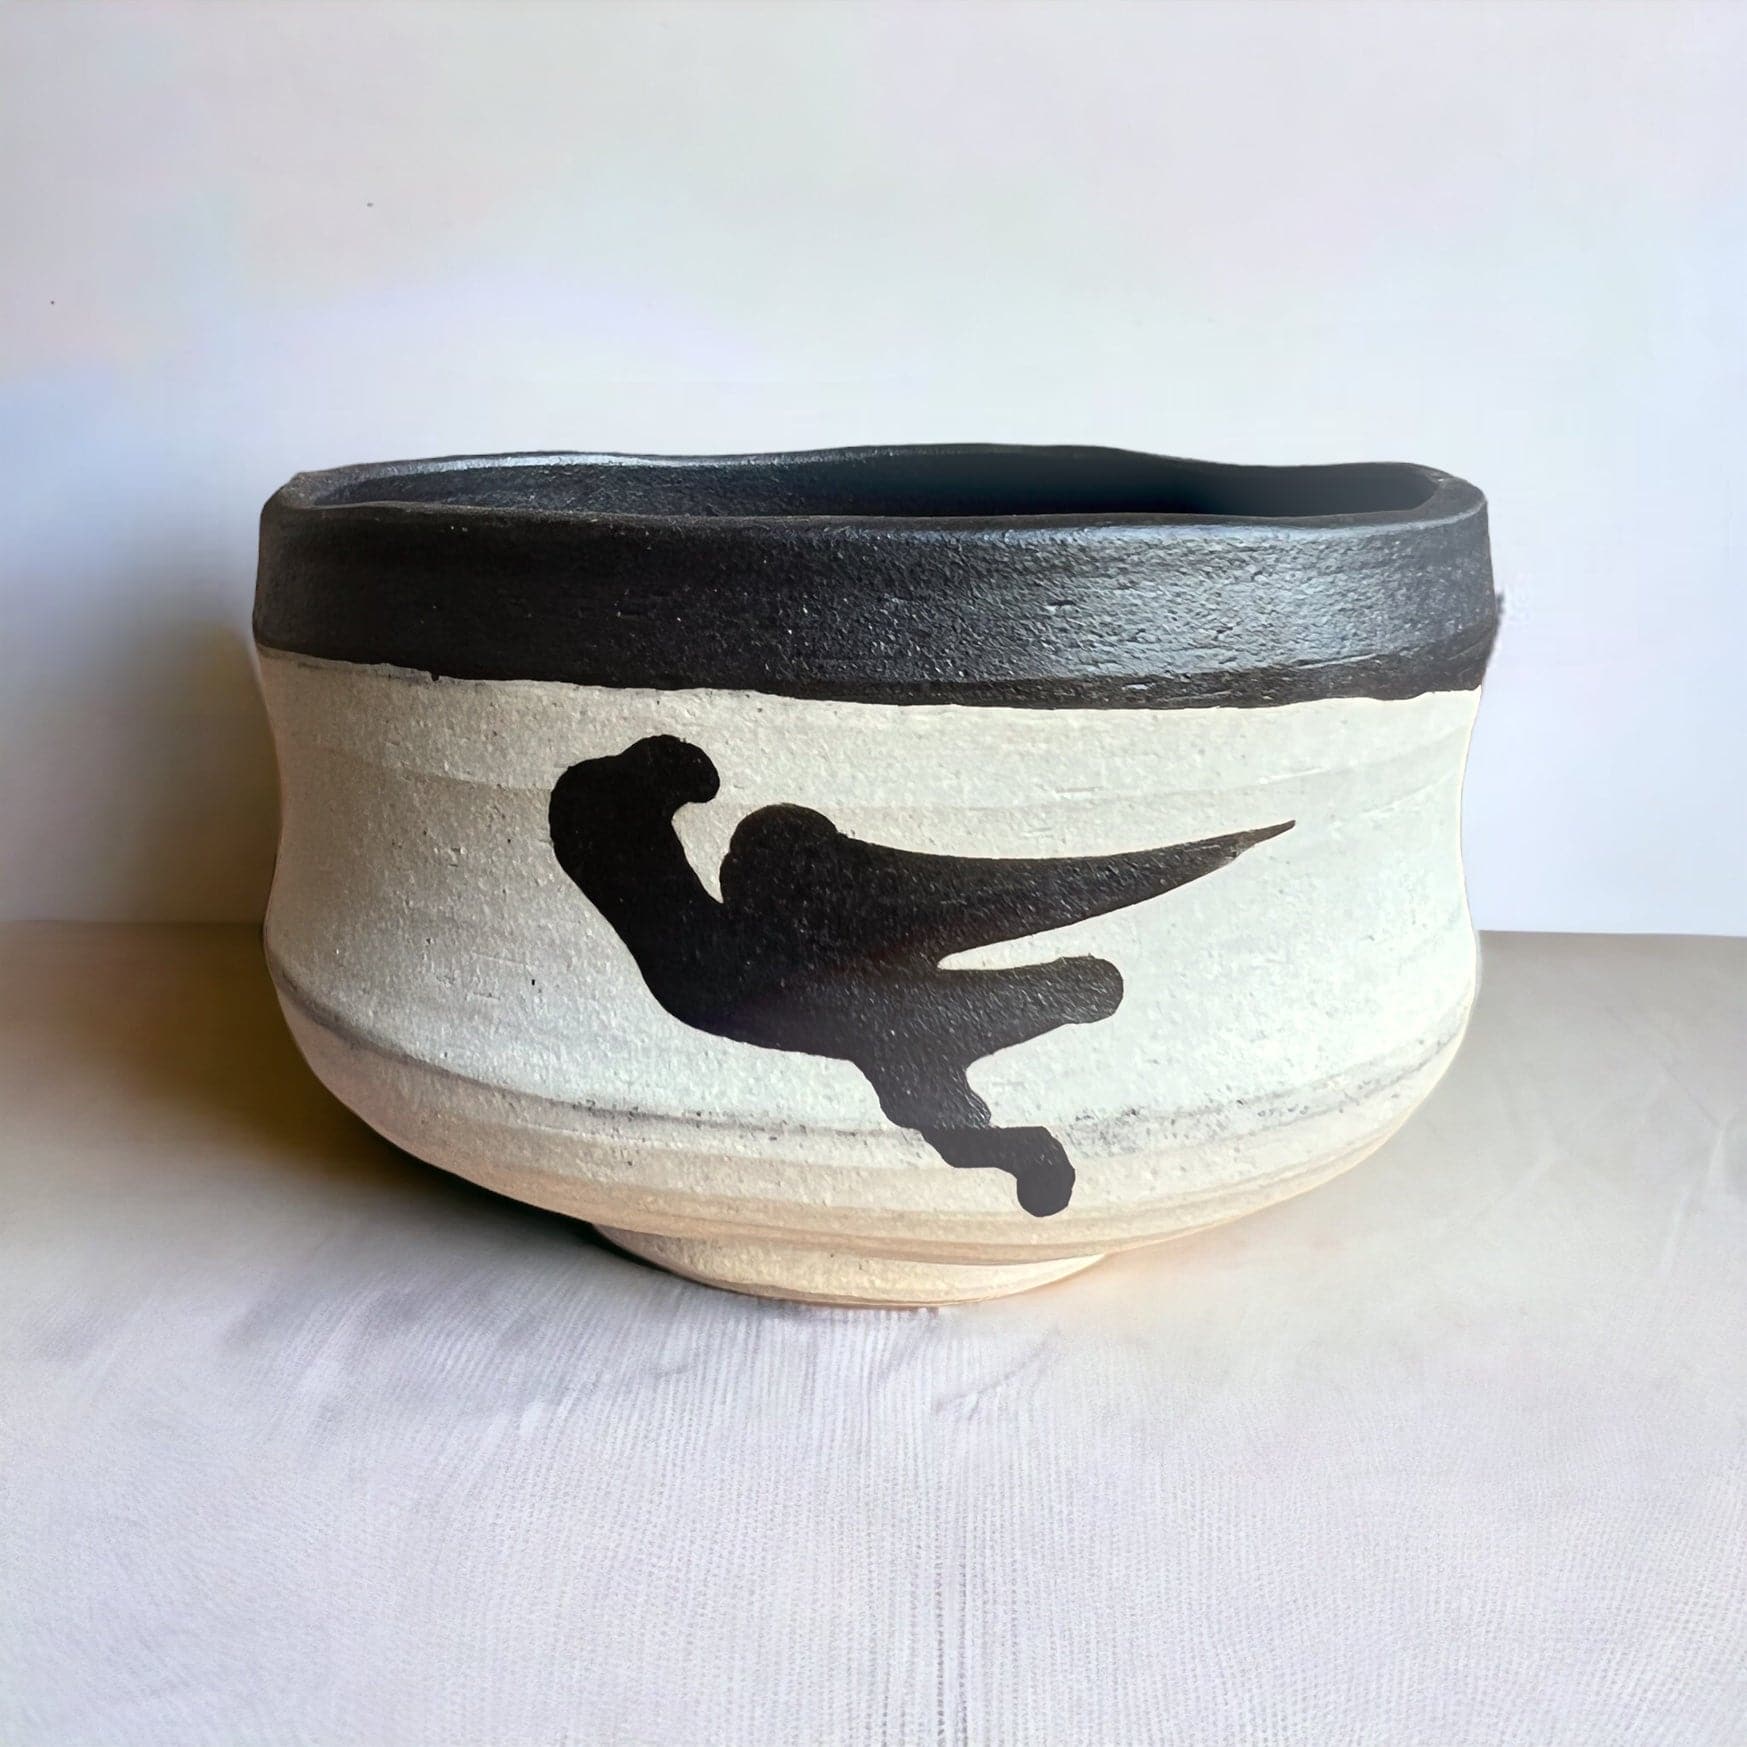 The third side of the hand made Ink Spot Matcha Bowl.